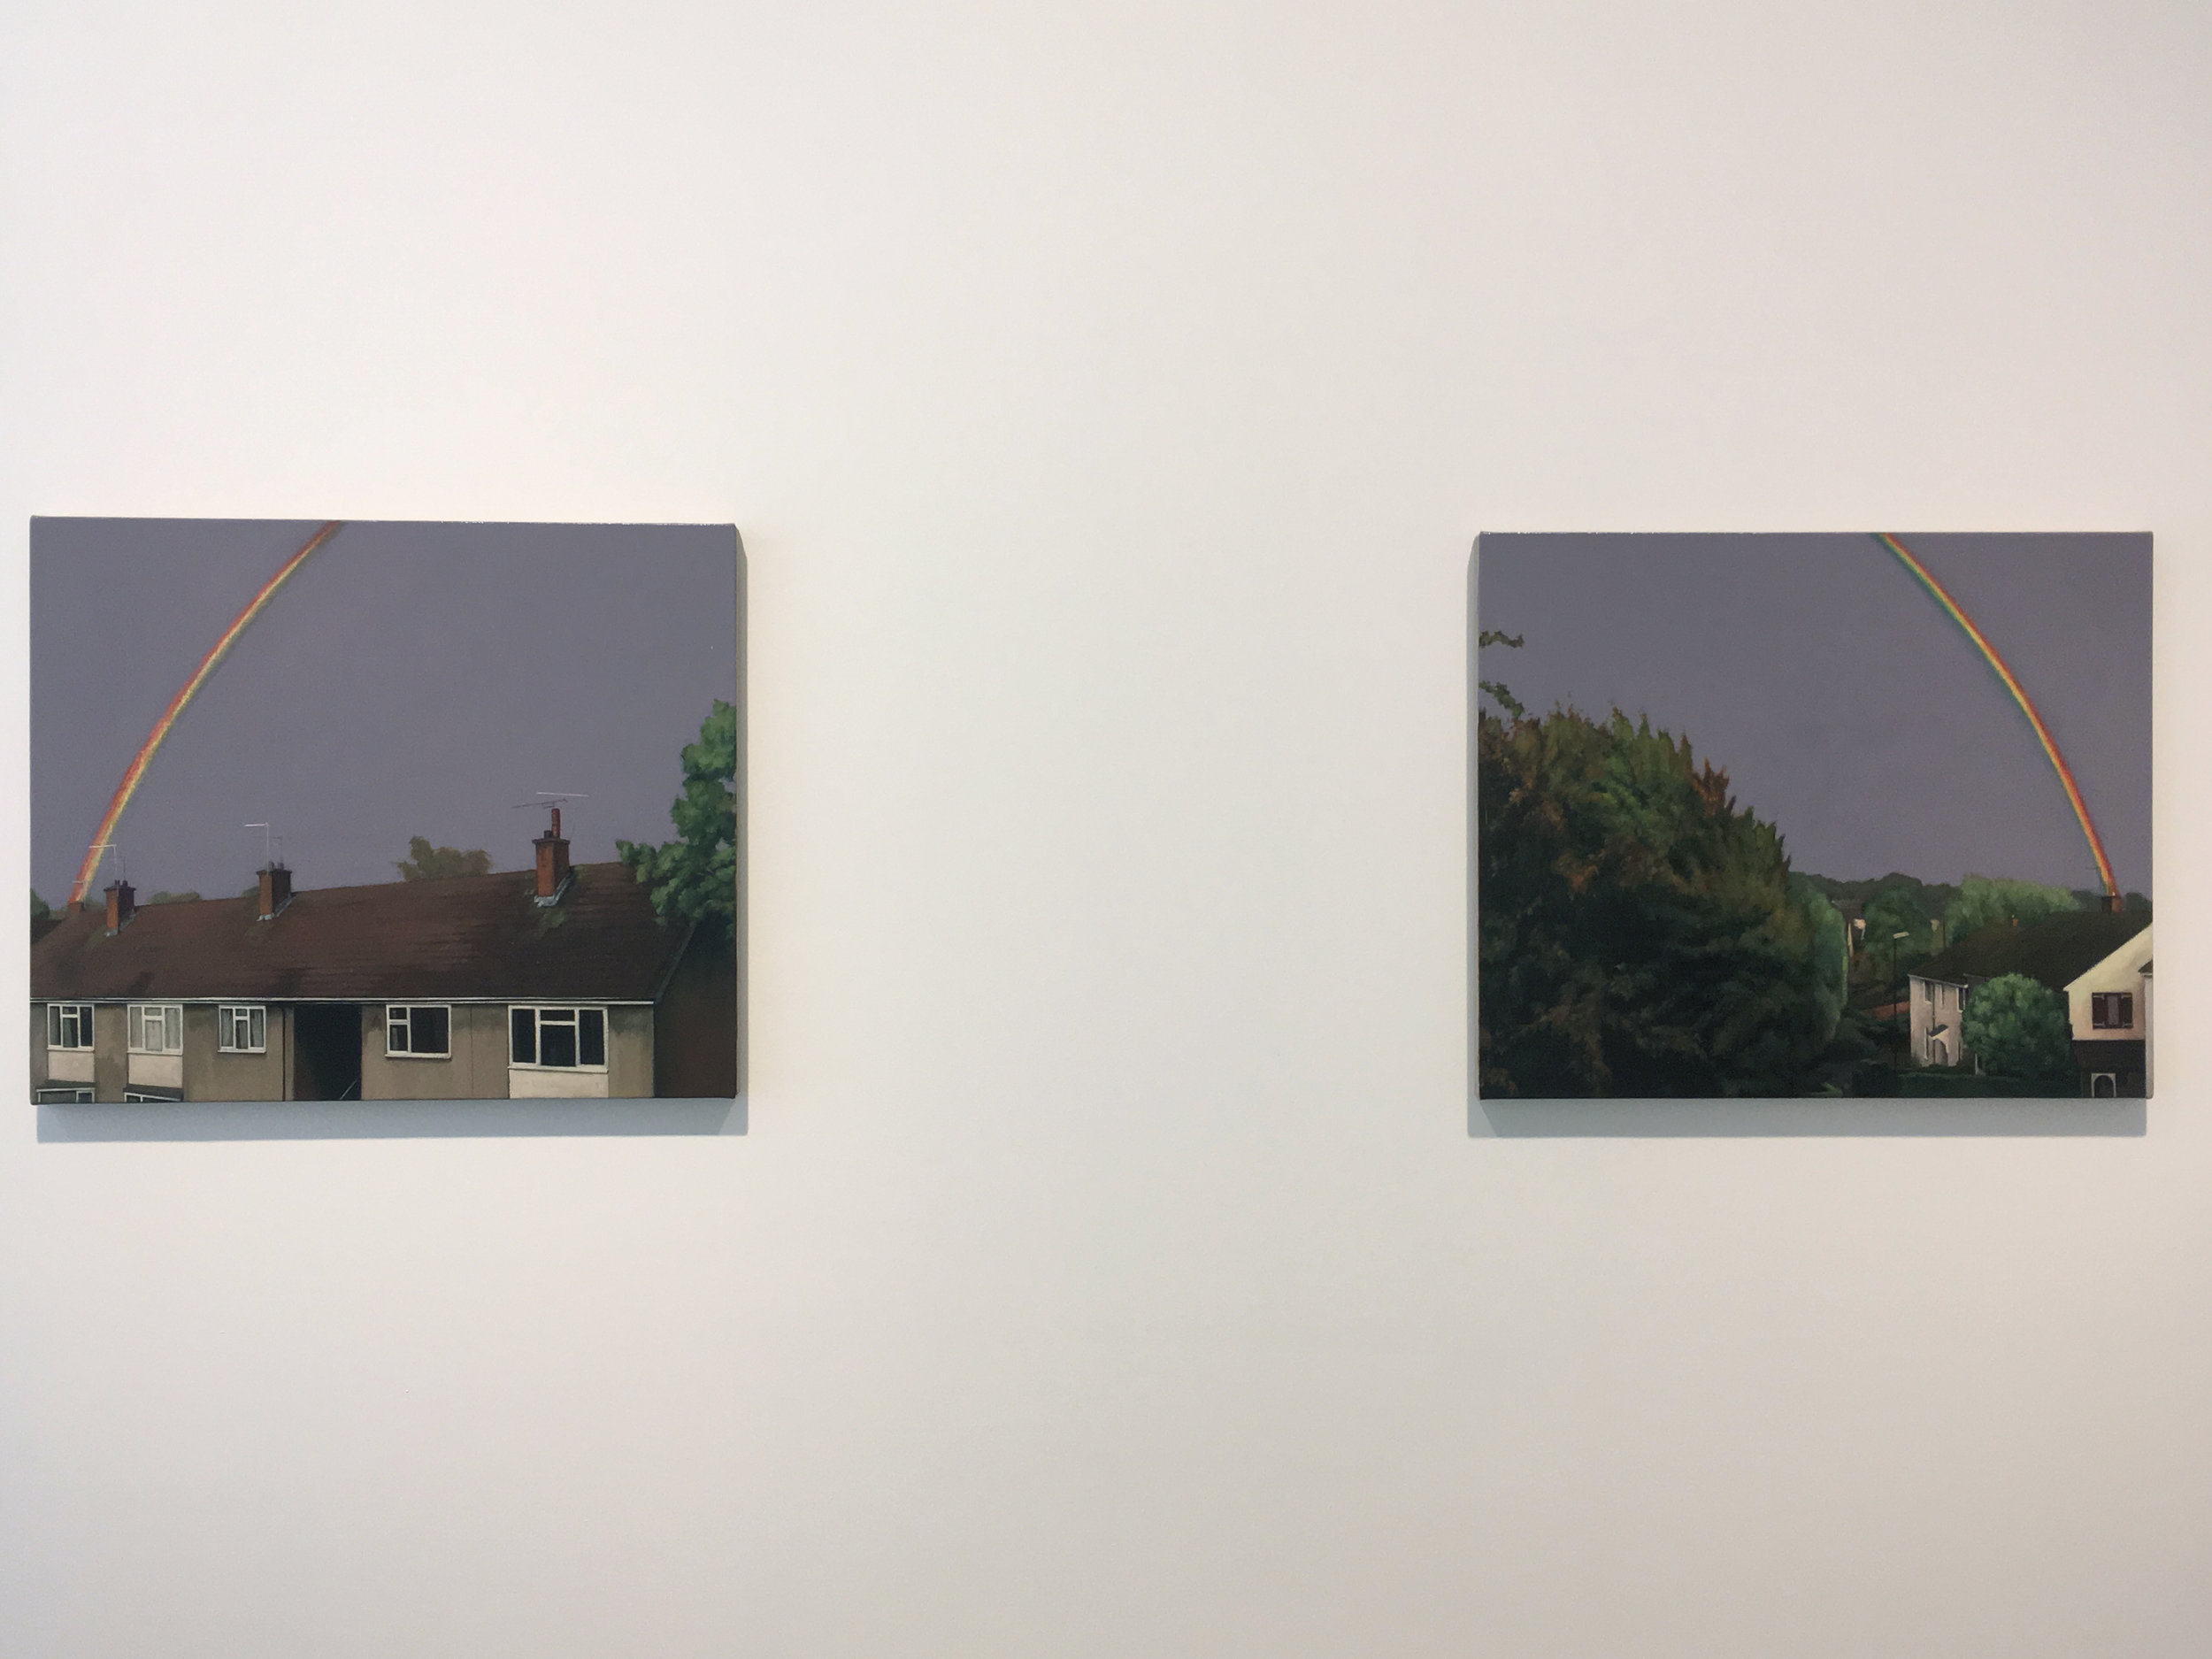 George Shaw, 'The Lost of England', galerie Maruani Mercier, vue d'exposition